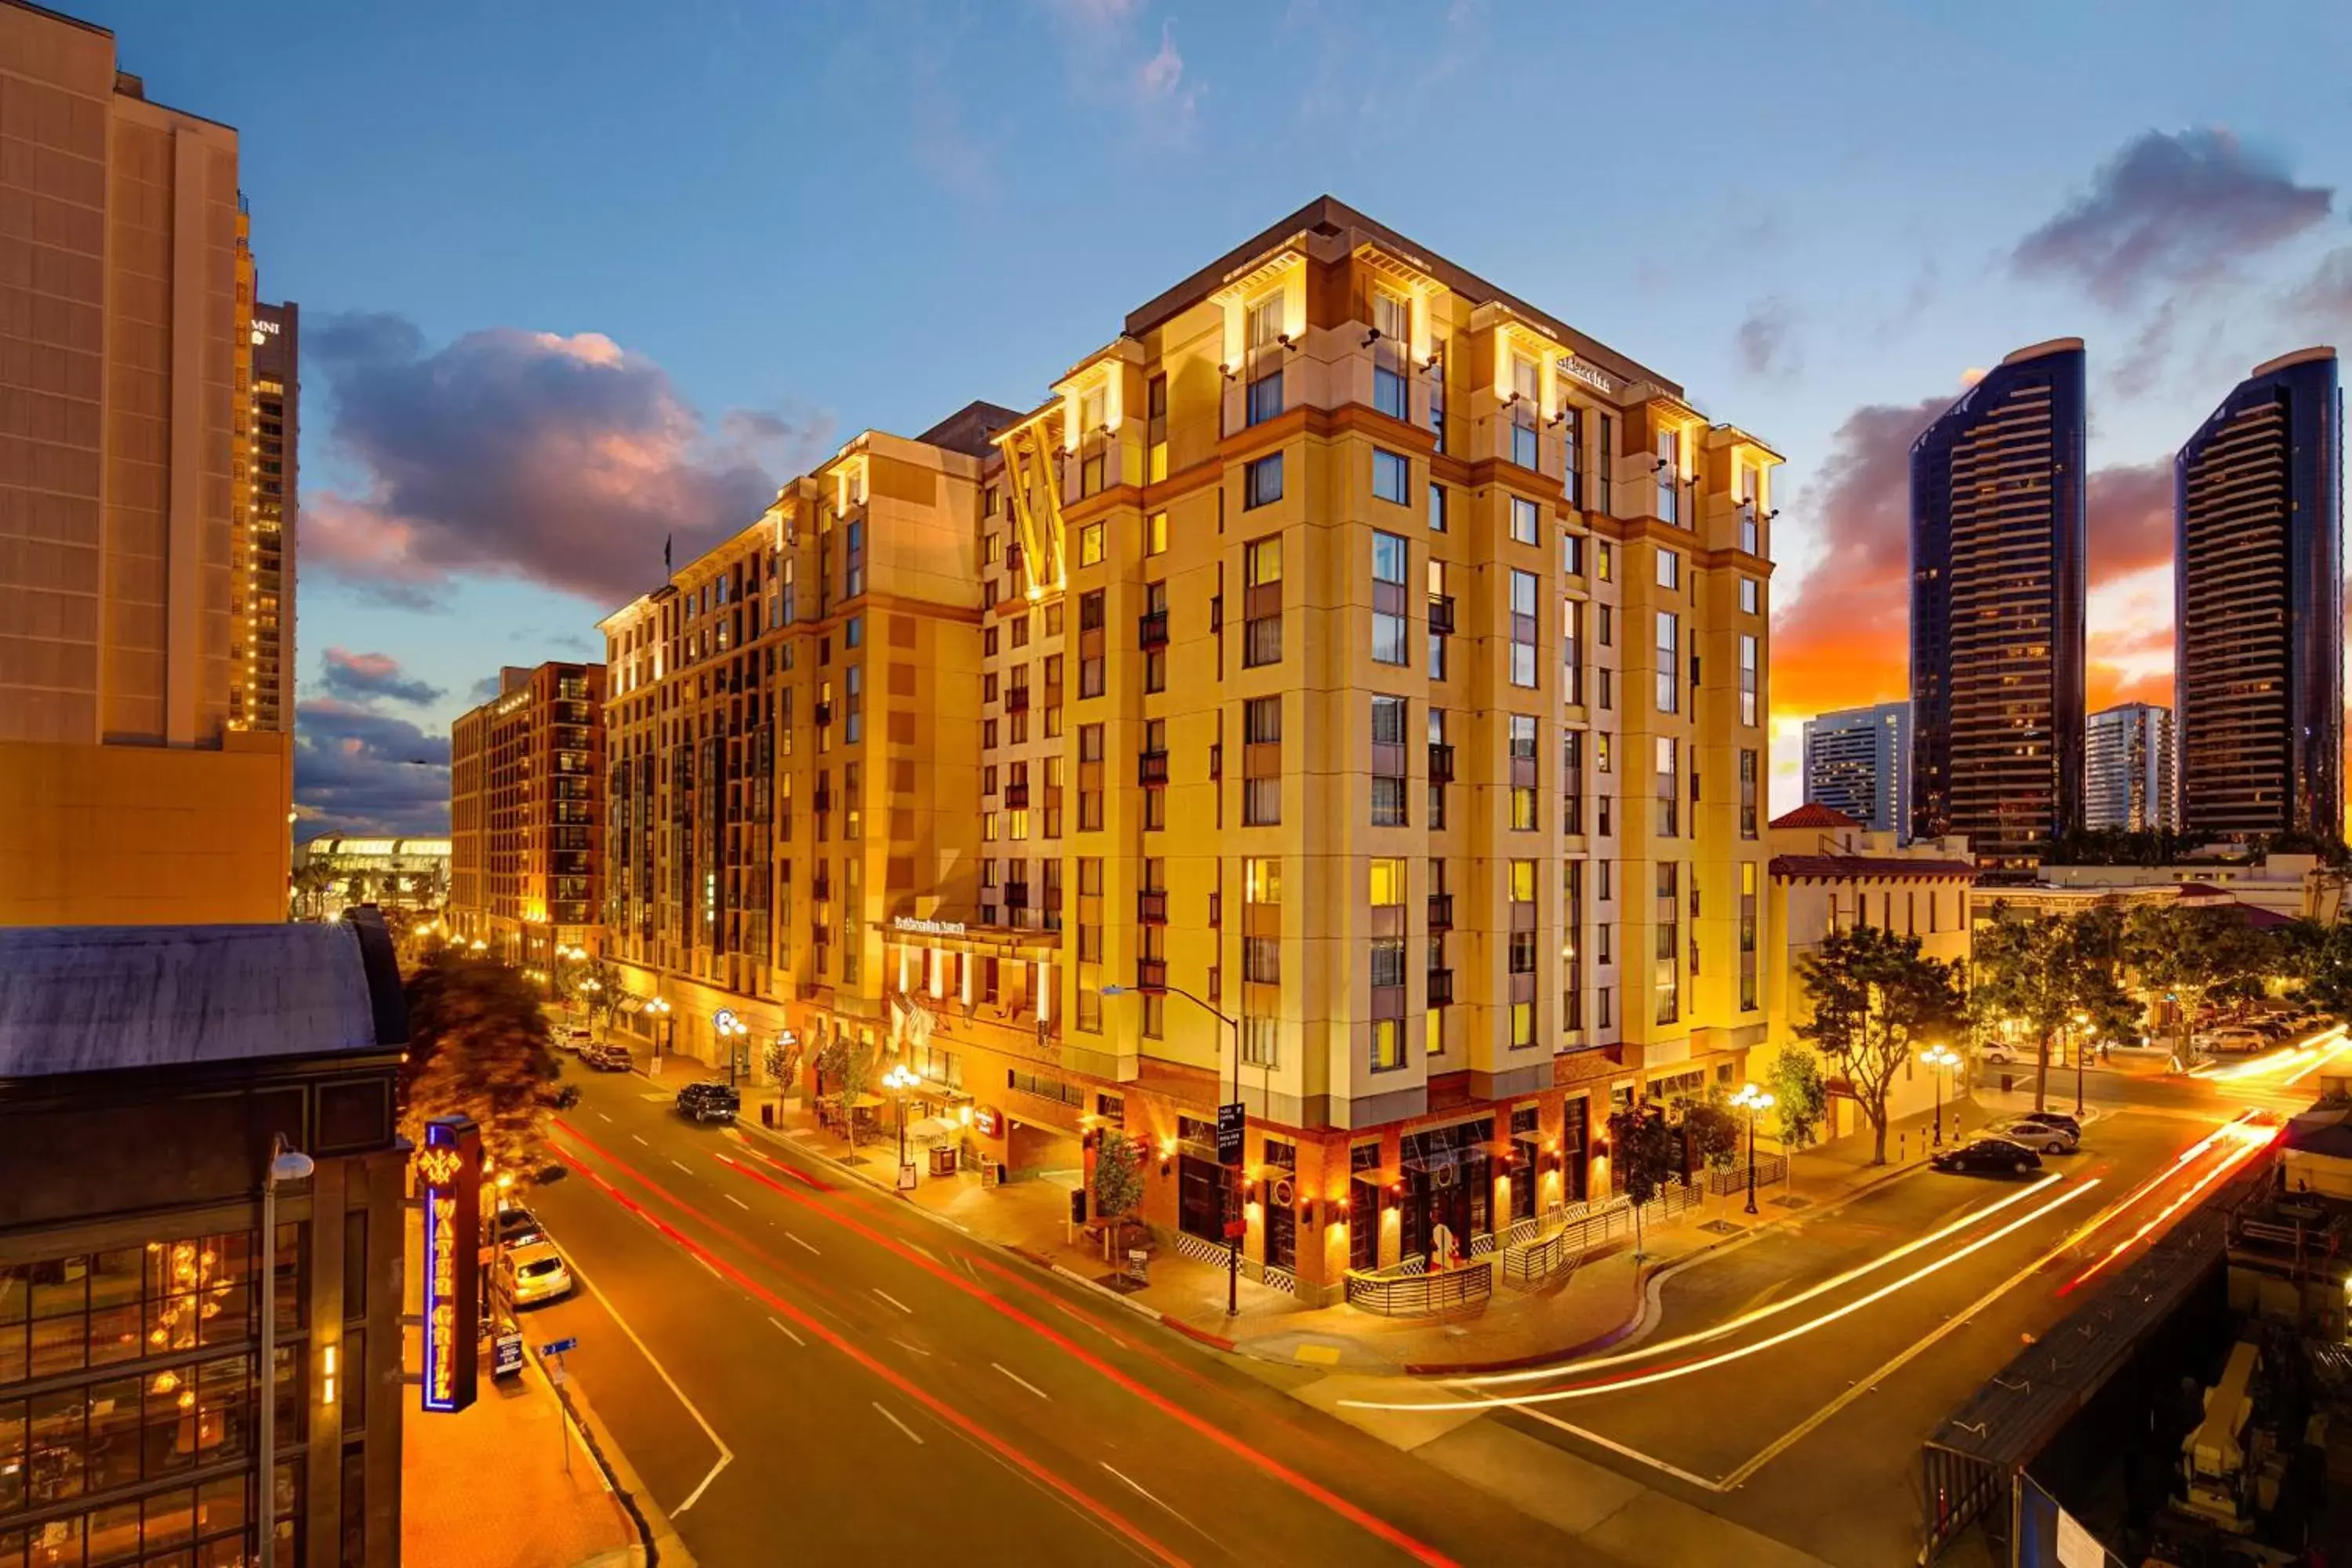 Property building in Residence Inn by Marriott San Diego Downtown/Gaslamp Quarter